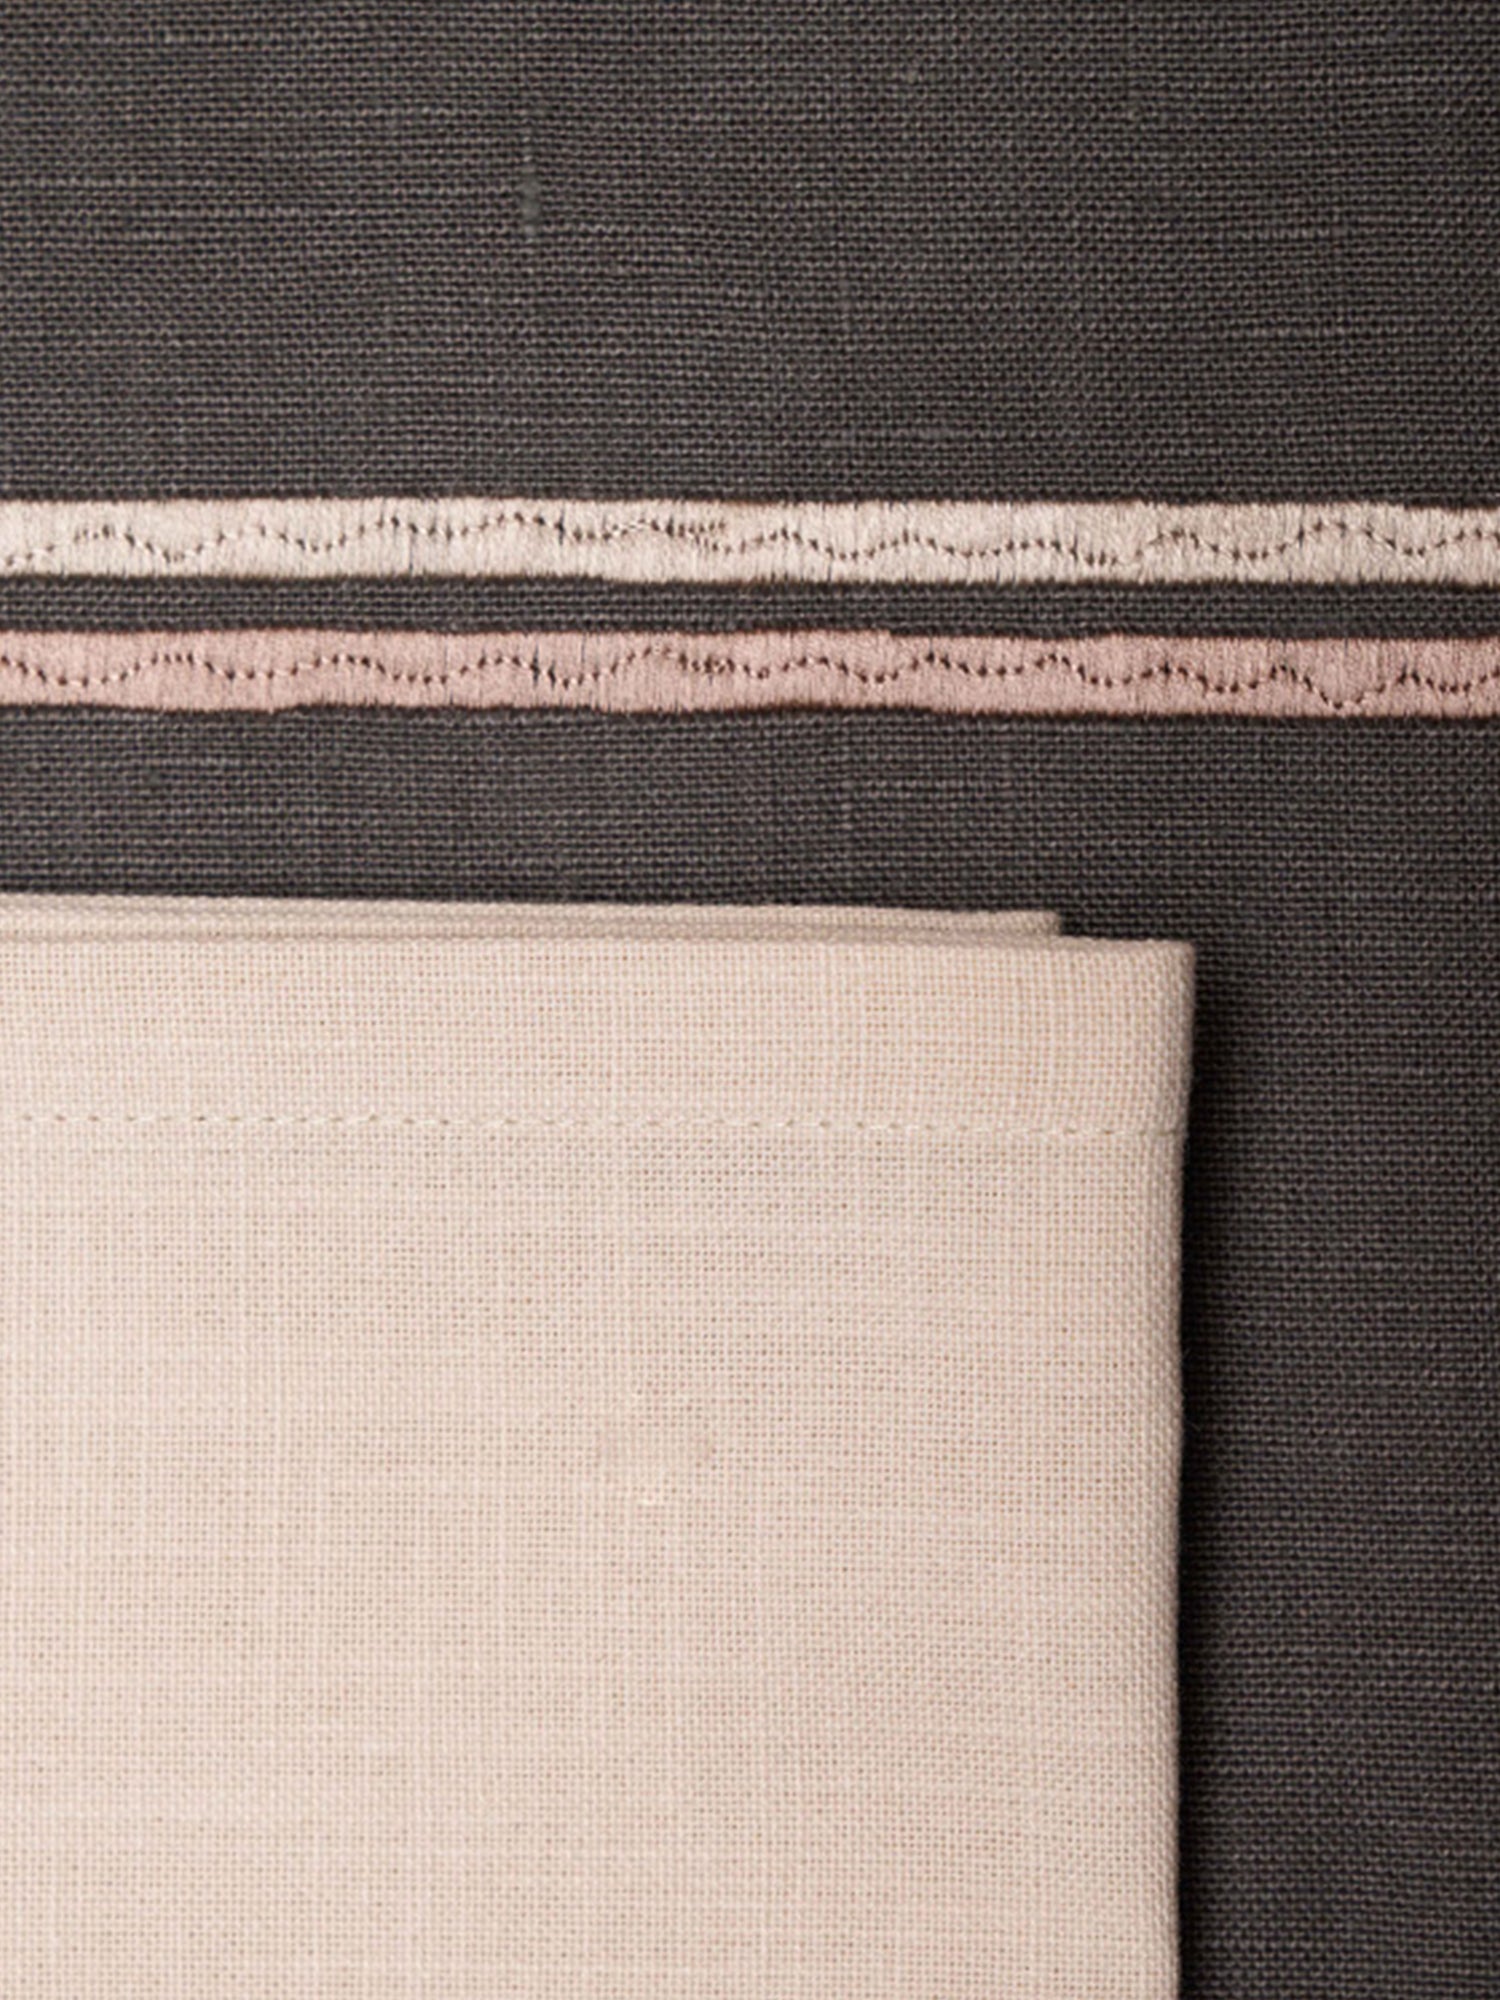 closeup of embroidered placemats and napkins set in dark gray with rose gold and silver embroidery - set of 6 - 13x19 inch